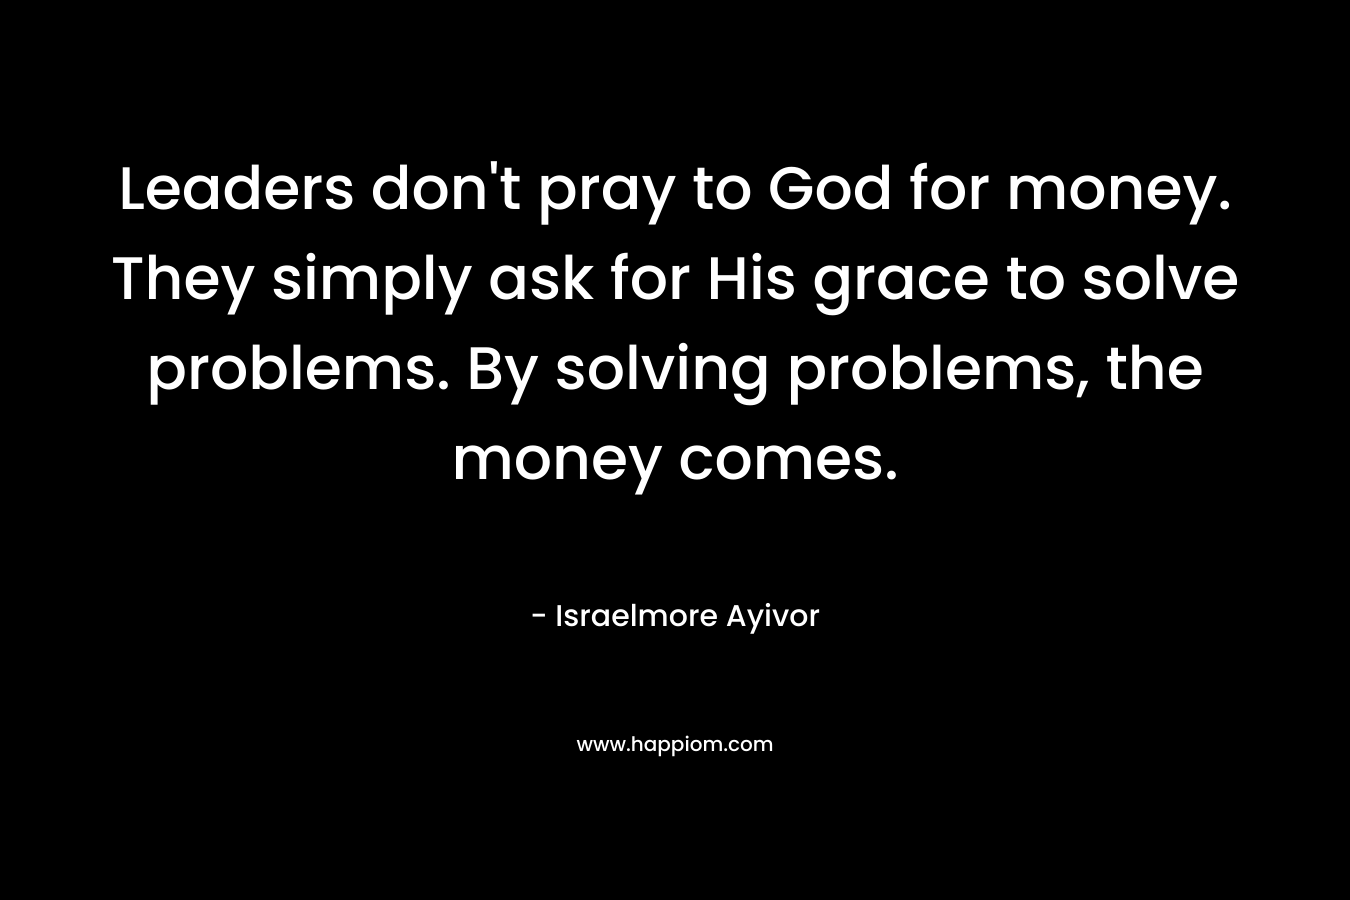 Leaders don't pray to God for money. They simply ask for His grace to solve problems. By solving problems, the money comes.